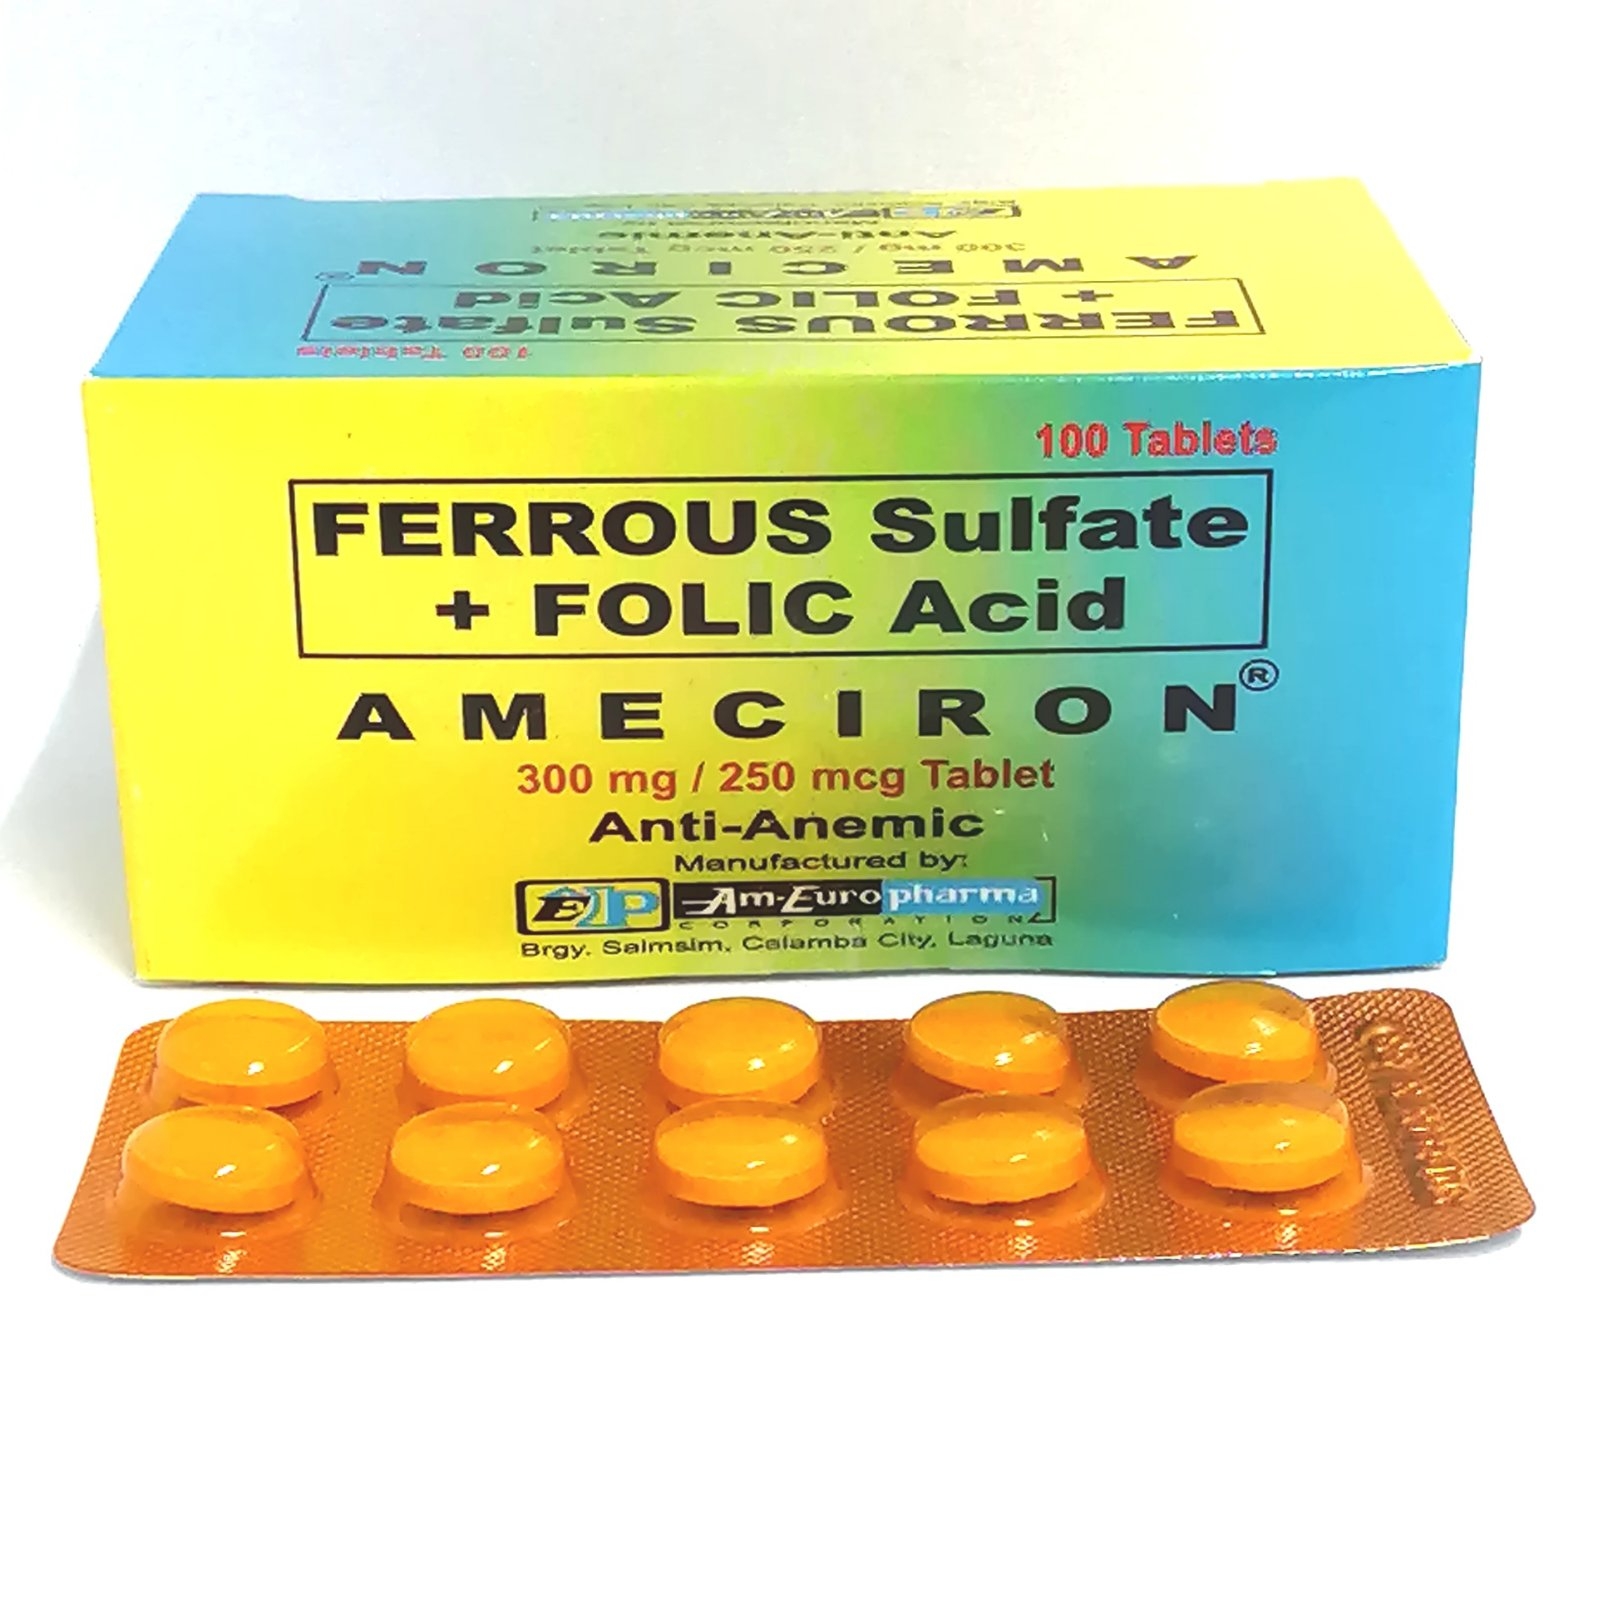 ferrous sulfate tablets during pregnancy